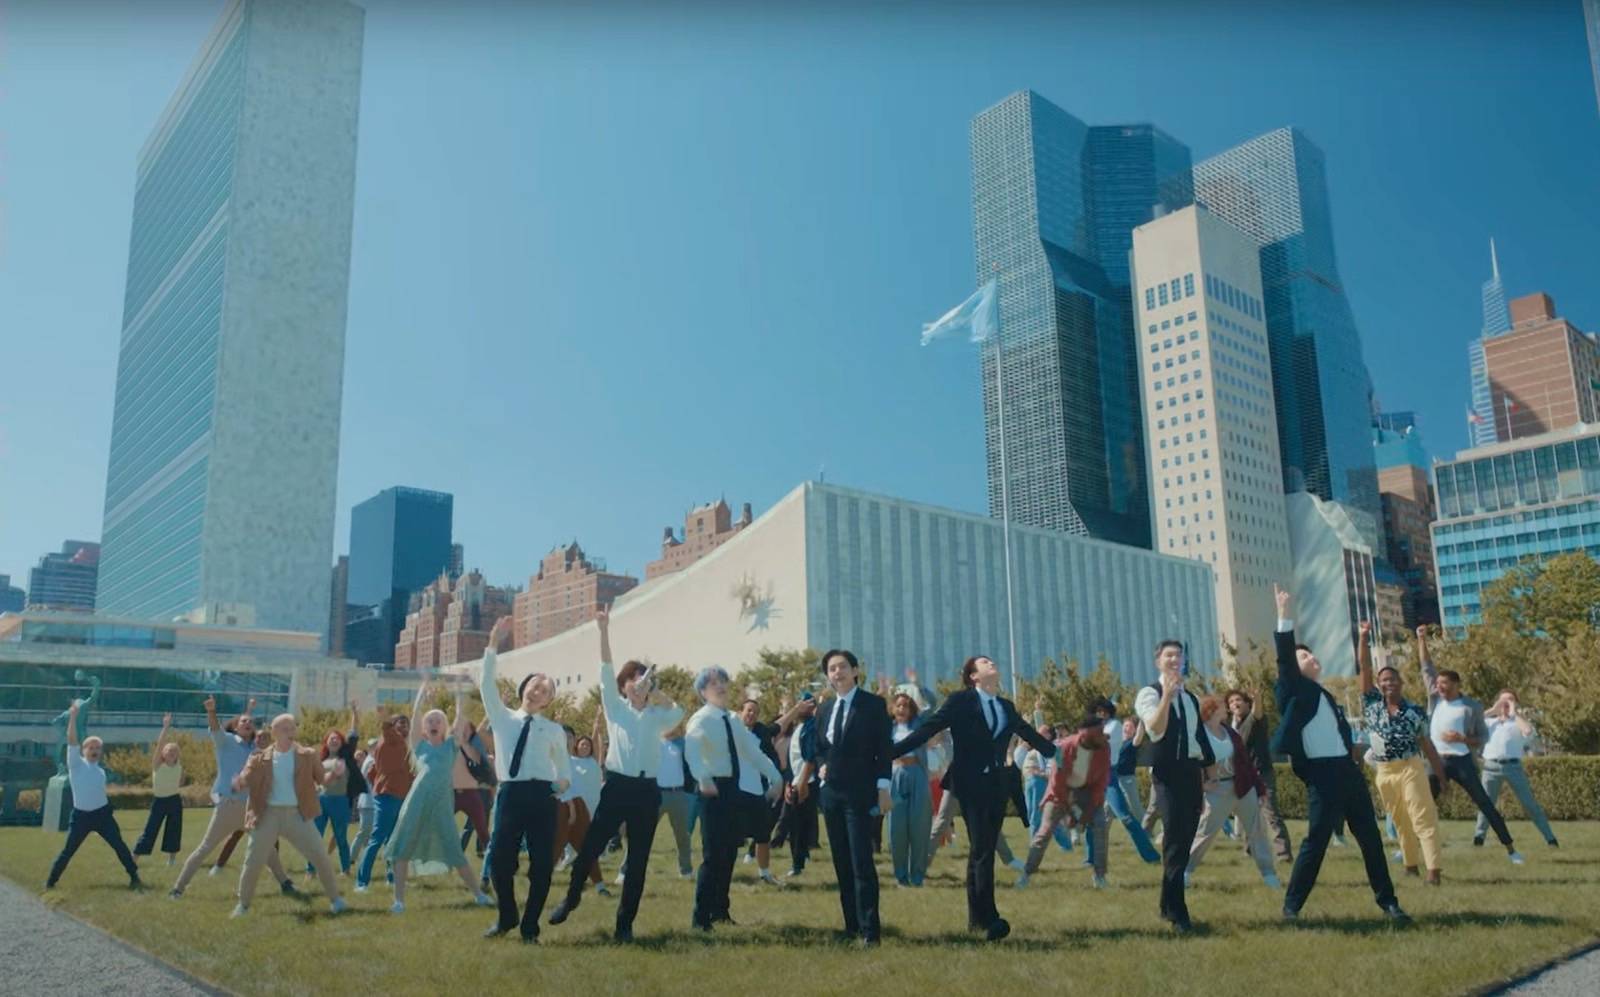 BTS made the United Nations go viral with ‘Permission to Dance’ video